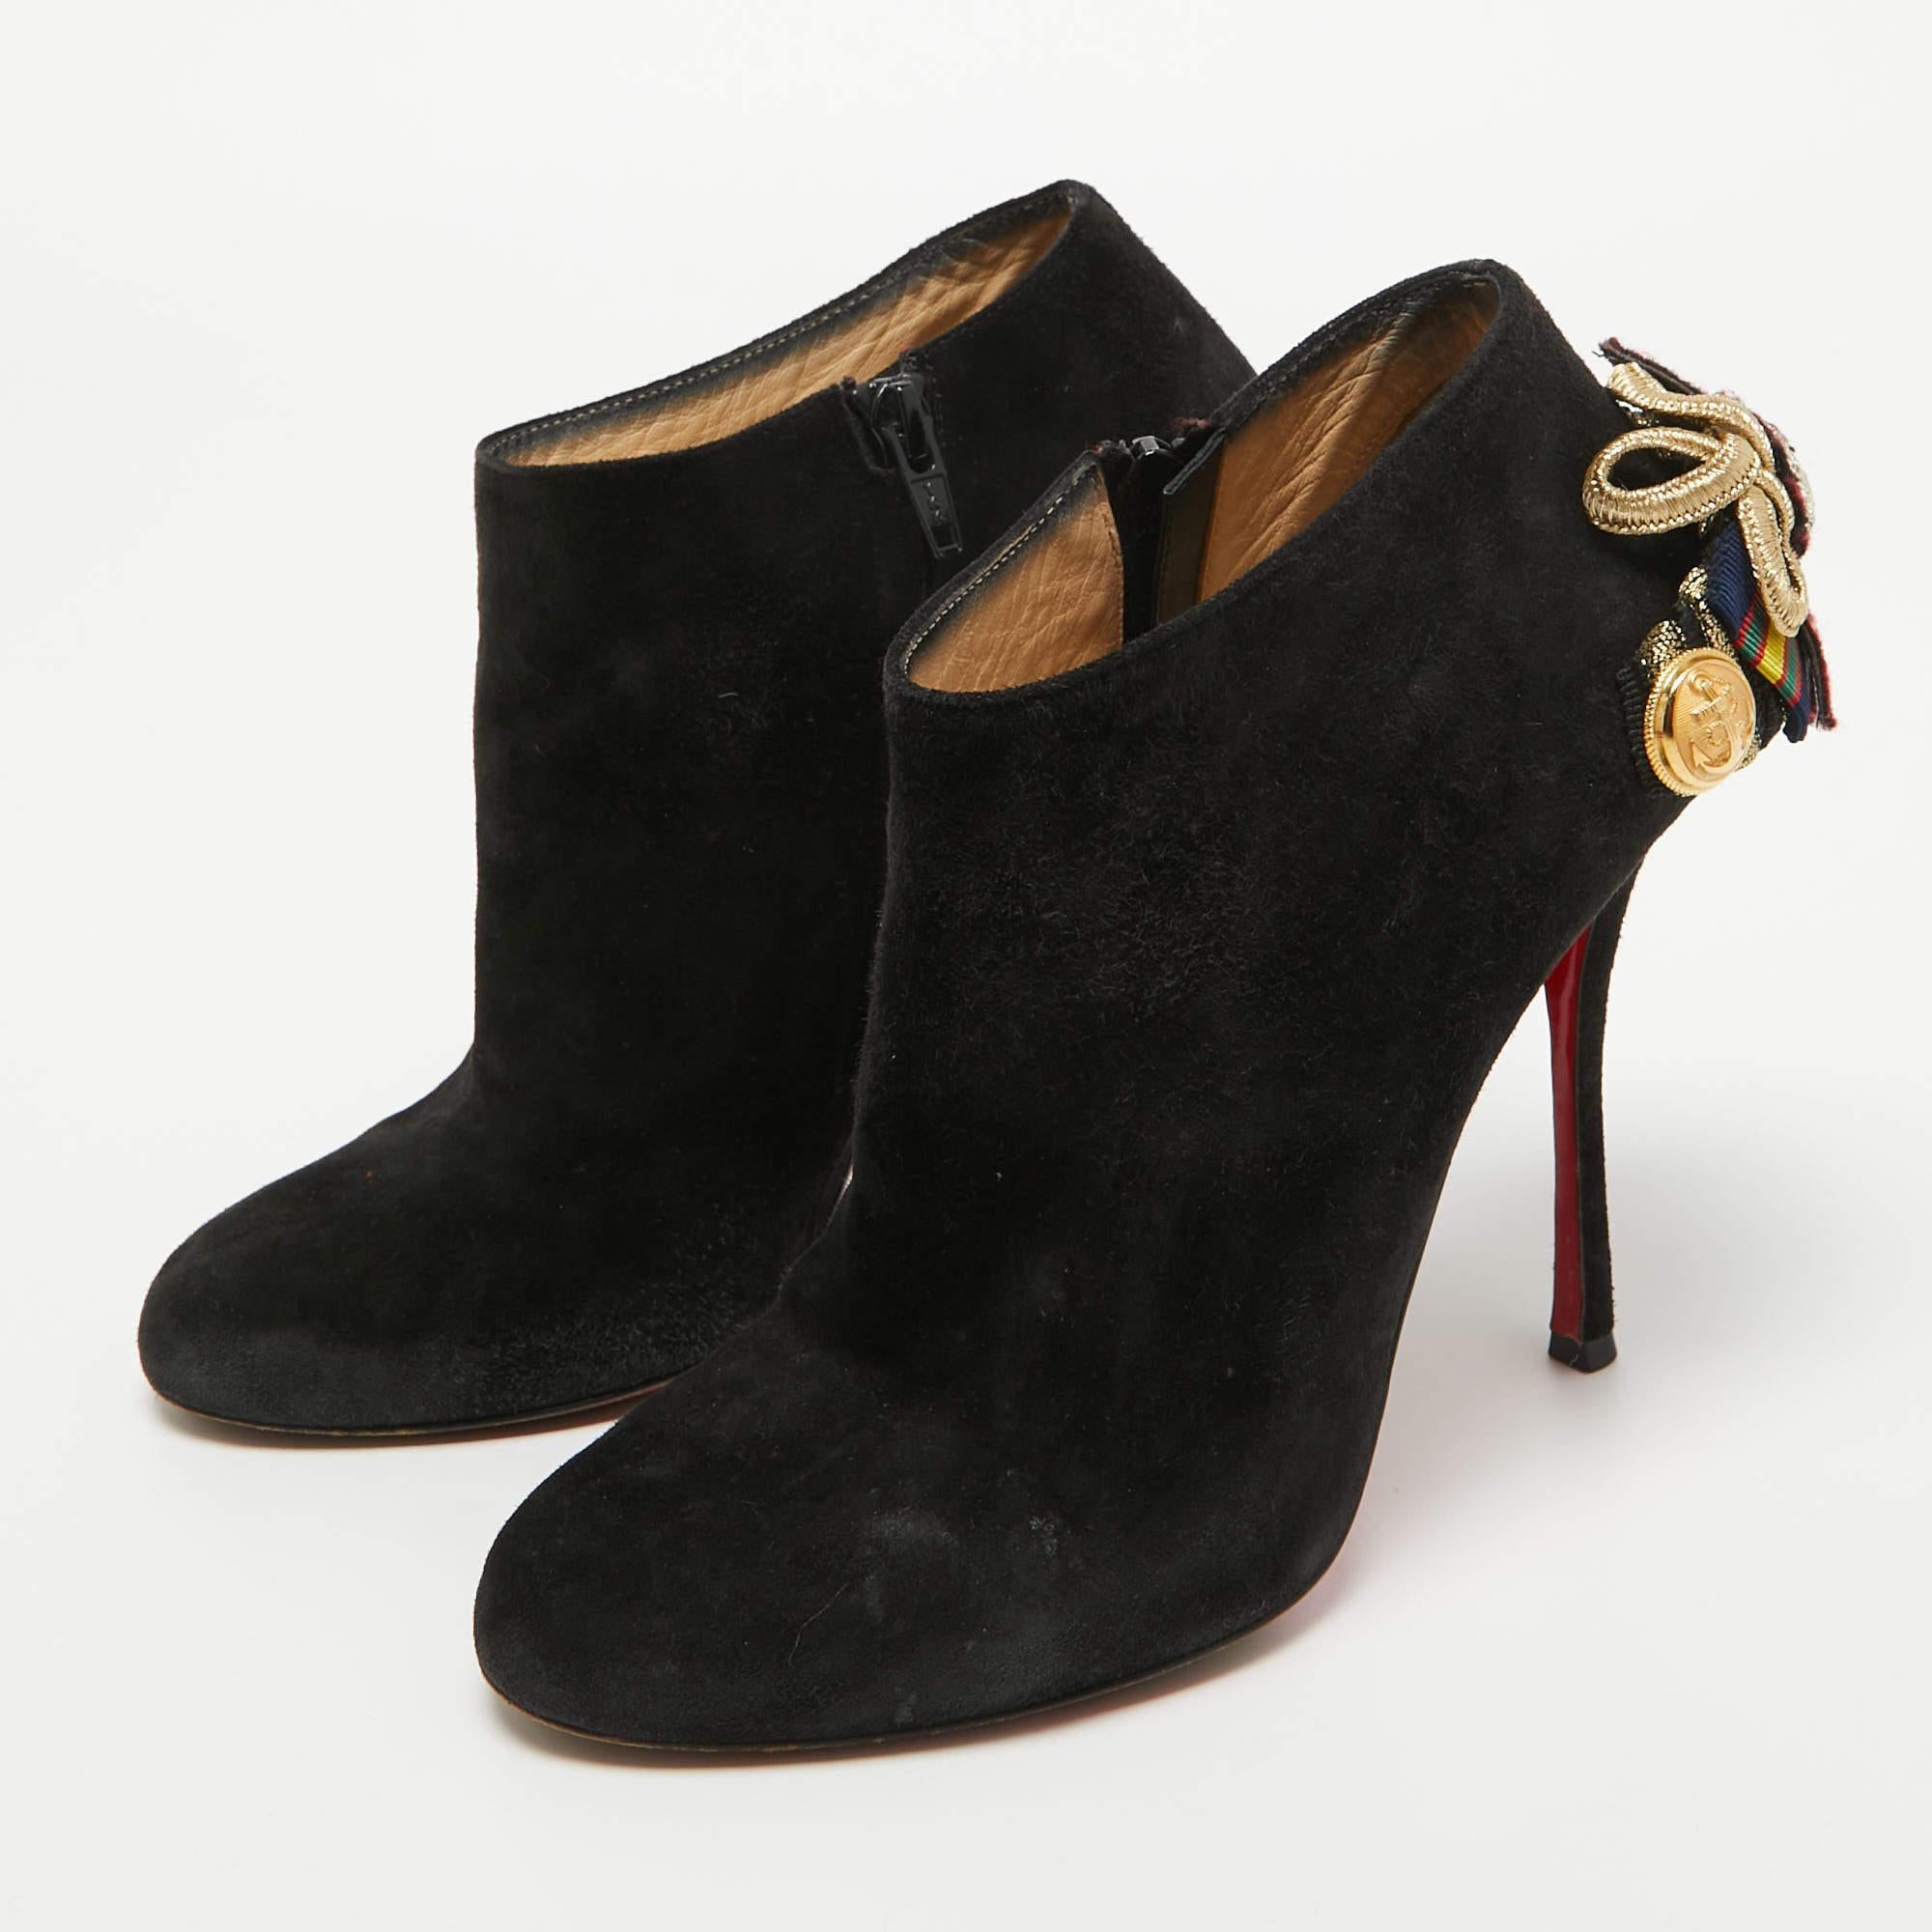 Christian Louboutin Black Suede Galobella Ankle Boots Size 38 For Sale 4